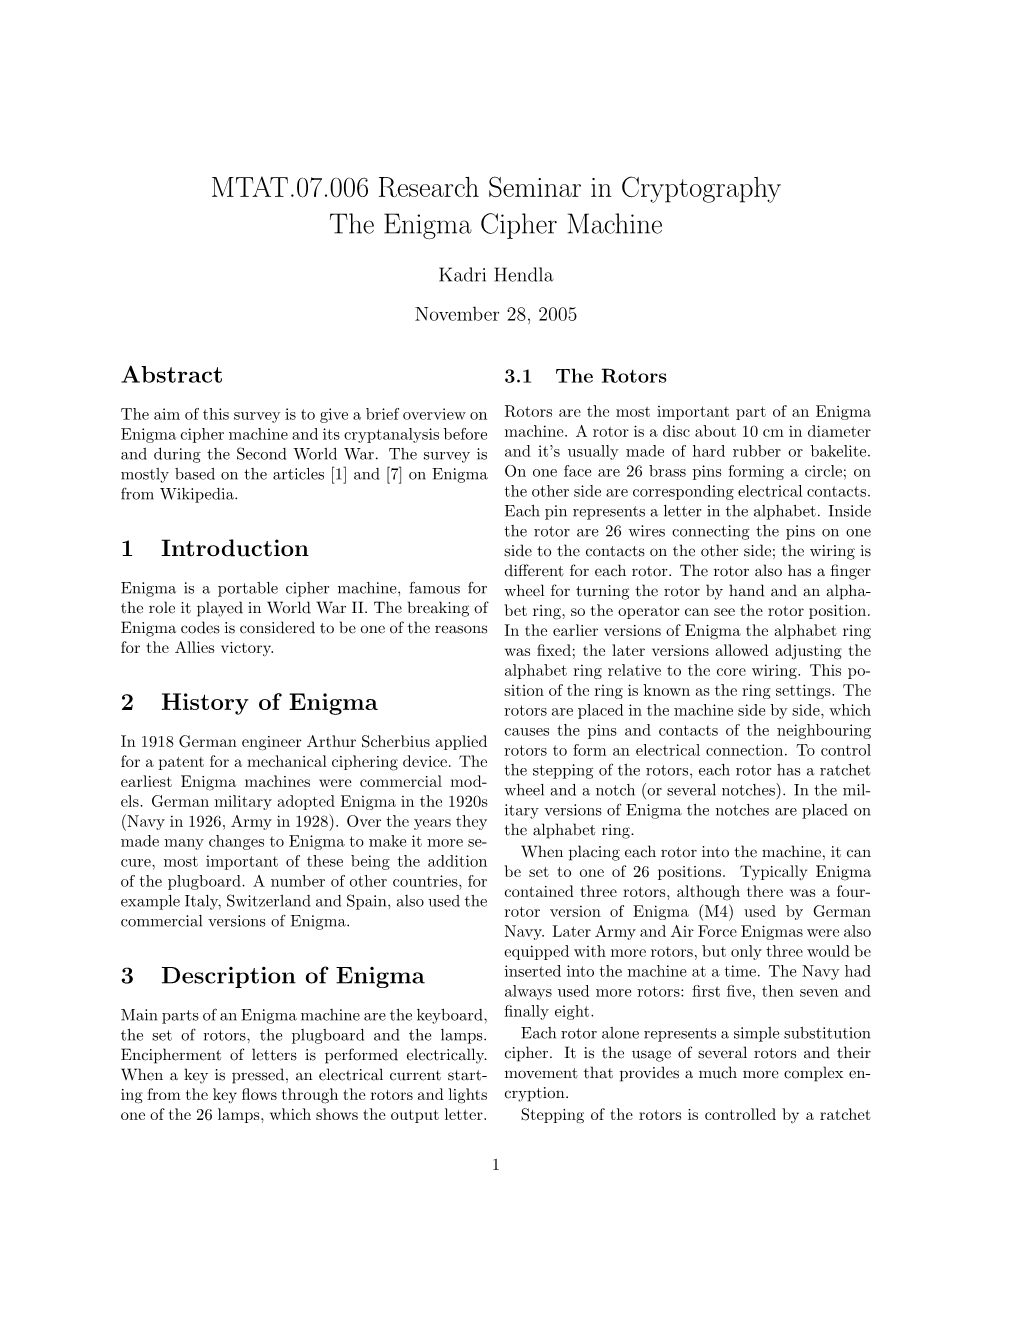 MTAT.07.006 Research Seminar in Cryptography the Enigma Cipher Machine